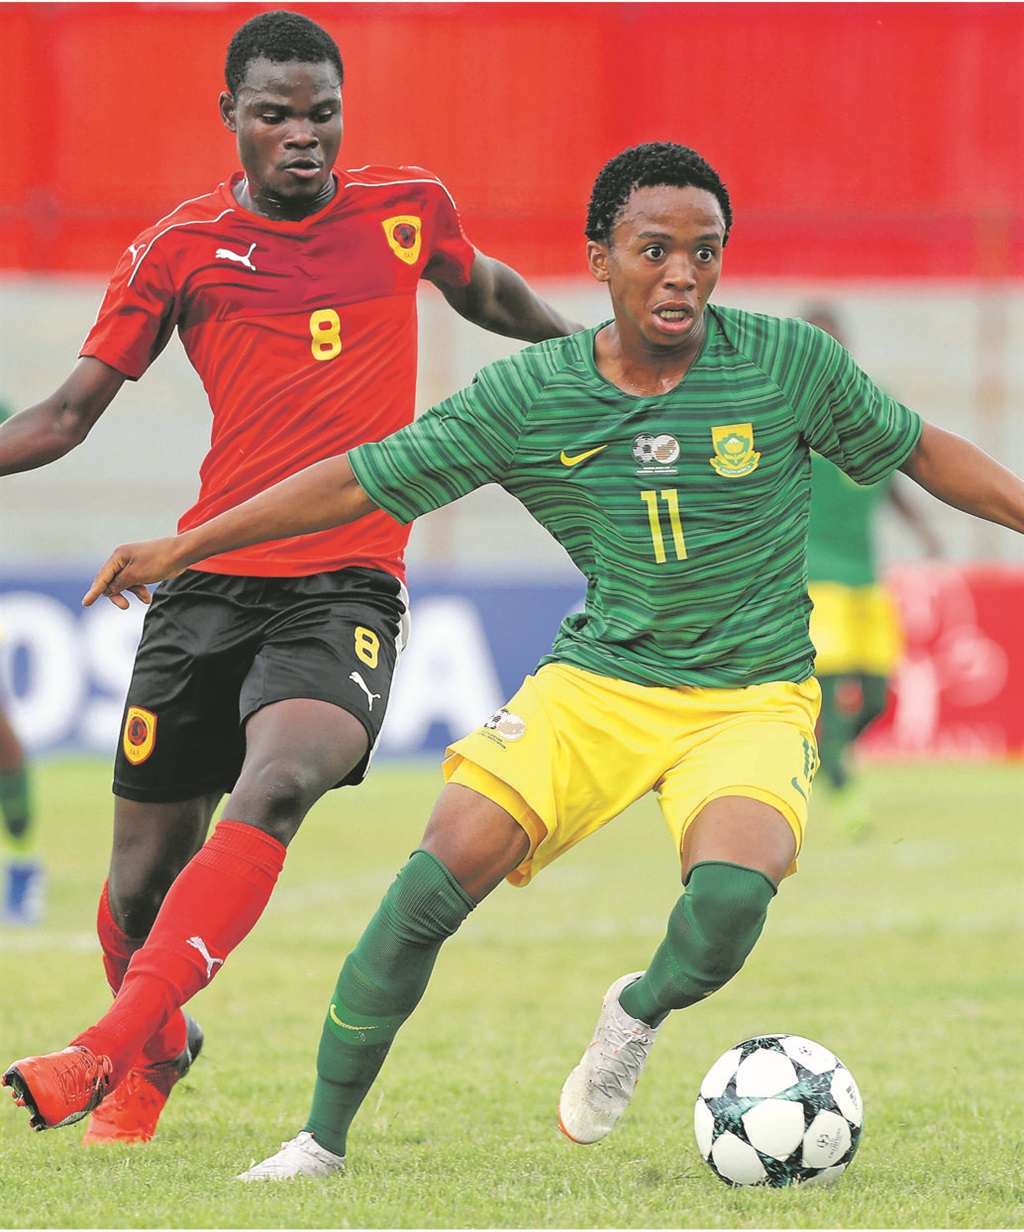 READY Amajita player Nkosingiphile Ngcobo is ready for the challenge at the Under-20 Africa Cup of Nations in Niger. Picture: Chris Ricco / BackpagePix